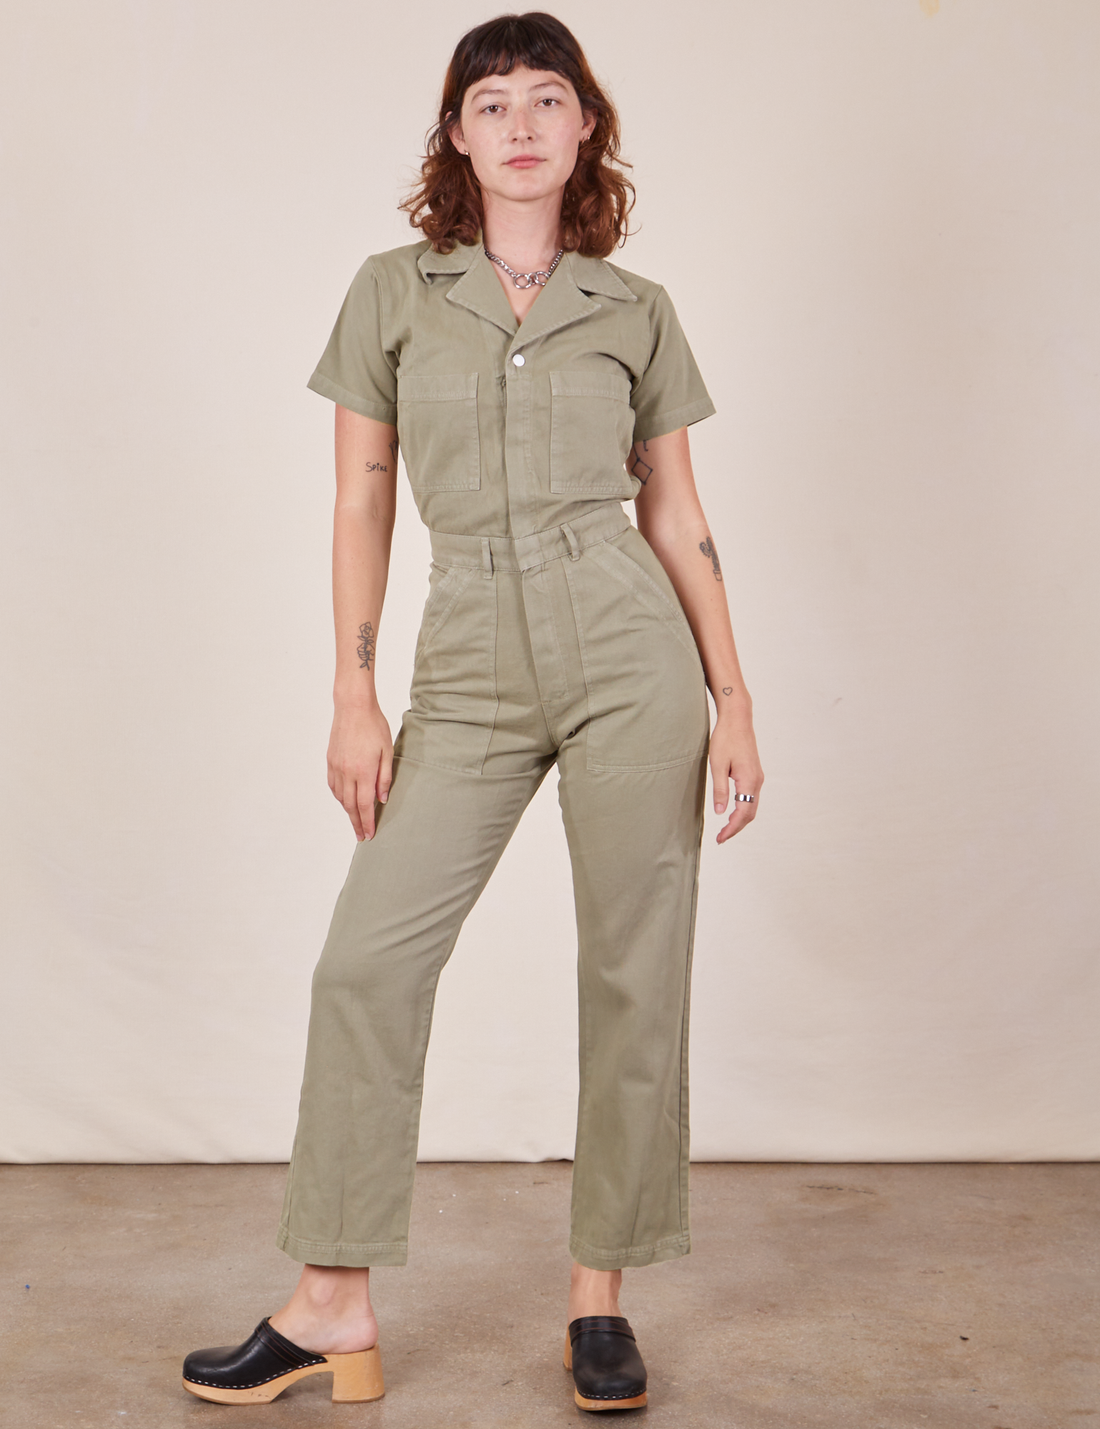 Alex is 5'8" and wearing XS Short Sleeve Jumpsuit in Khaki Grey